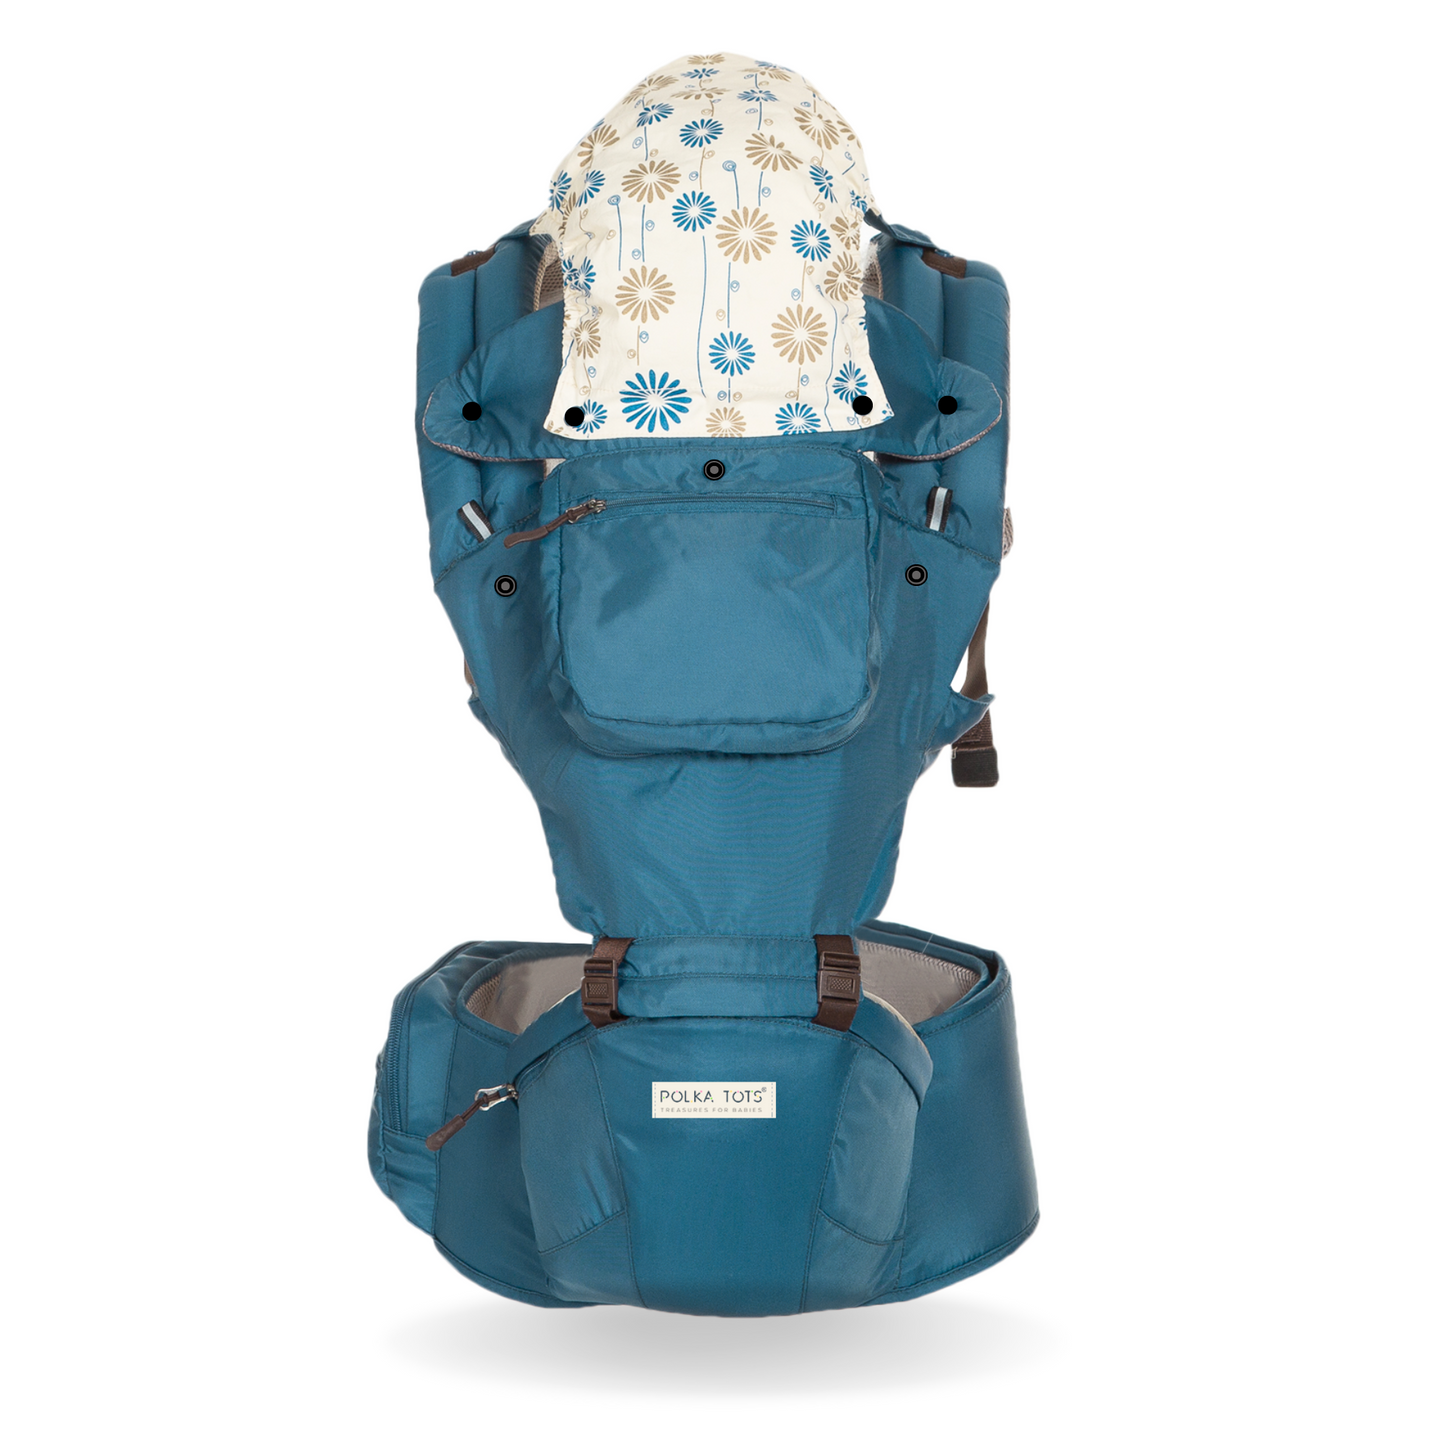 Ergonomic Baby Hip Seat / 6 in 1 Baby Carrier With Trendy Carry Bag (Blue)